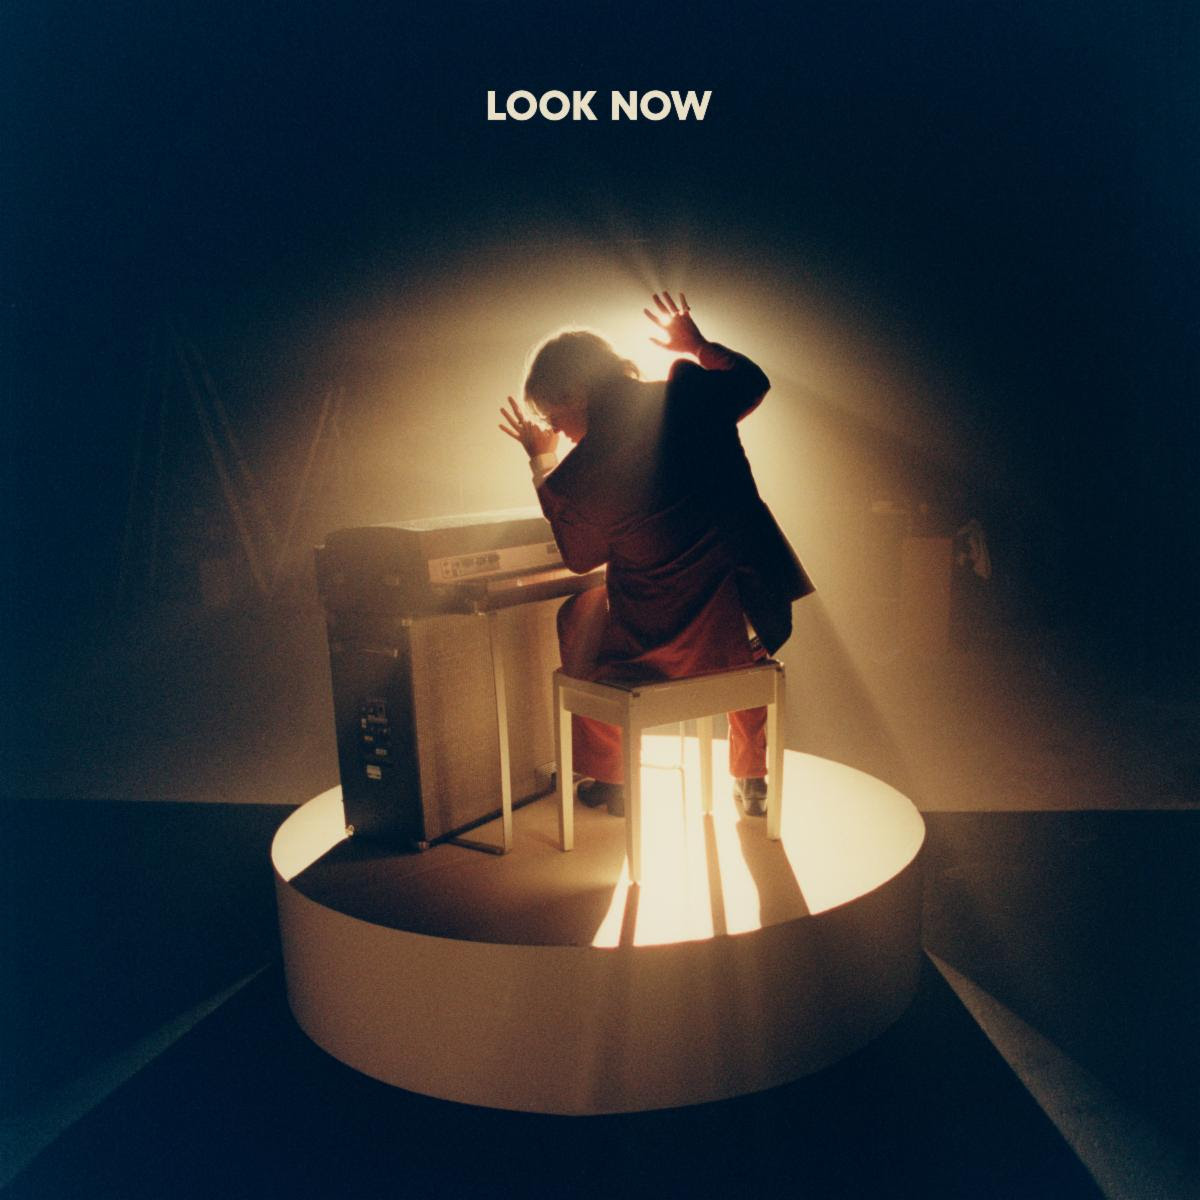 Oscar Lang has released his sophomore album Look Now via Dirty Hit, described as Deeply personal, the album features some of Oscar’s